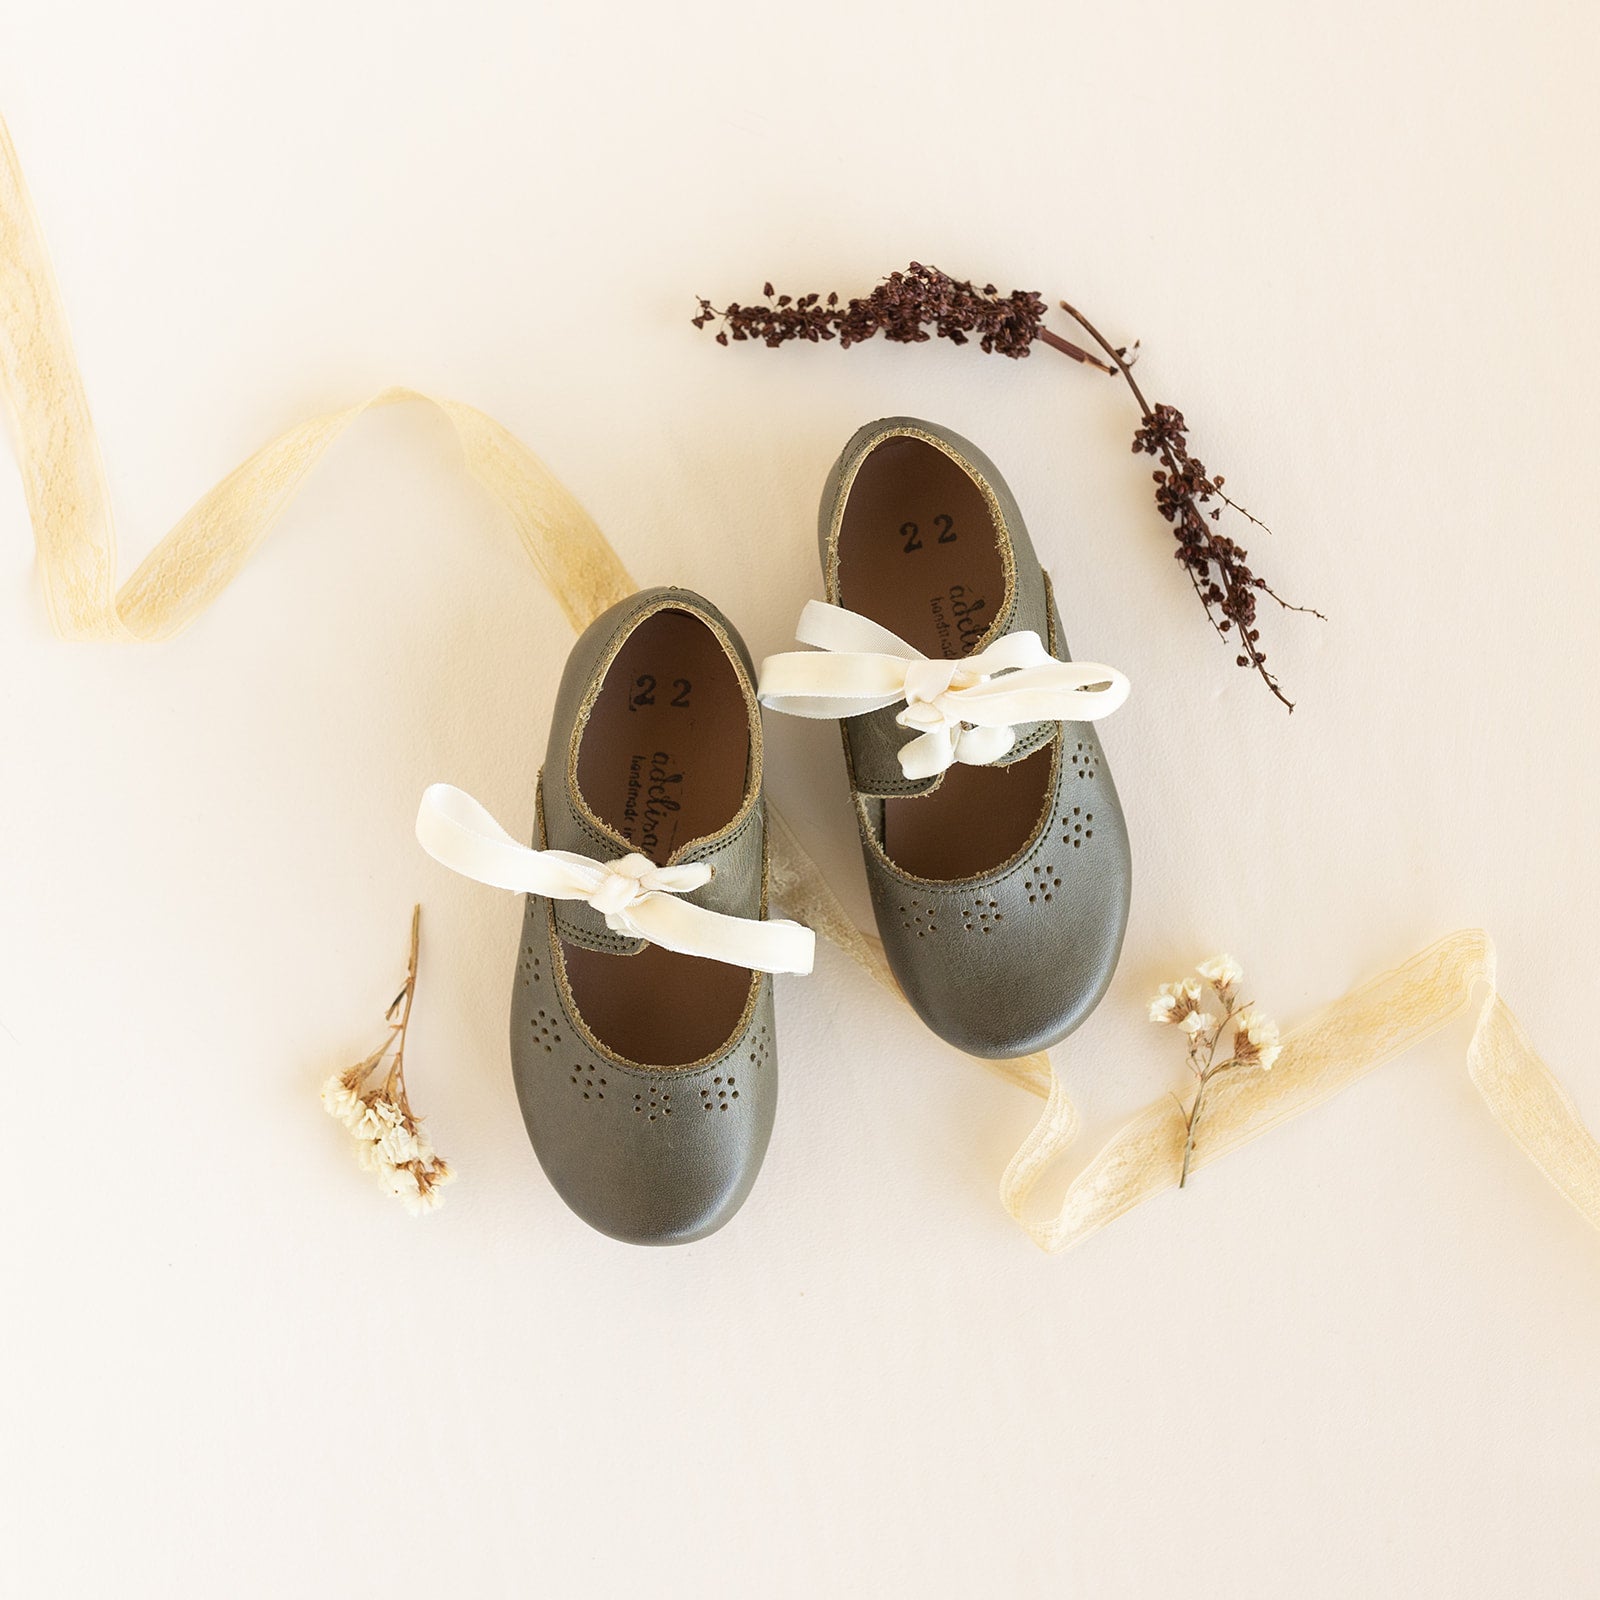 Oxford style Mary Janes with a vintage design. These leather Mary Janes for girls come in a beautiful earthy, dark green leather and have a handcrafted sun design outlining their border.